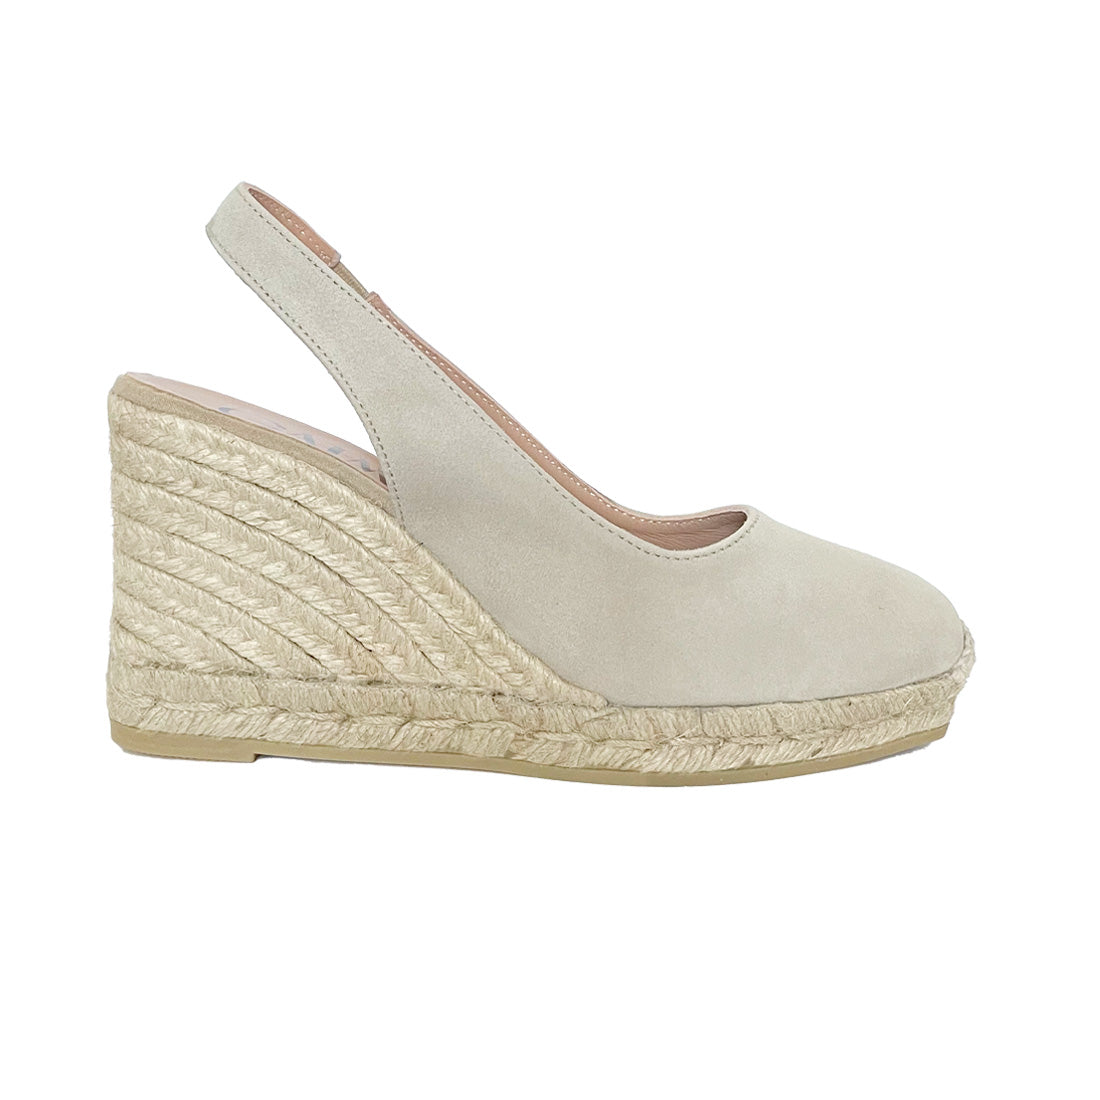 Nude espadrilles wedges handcrafted comfortable shoes